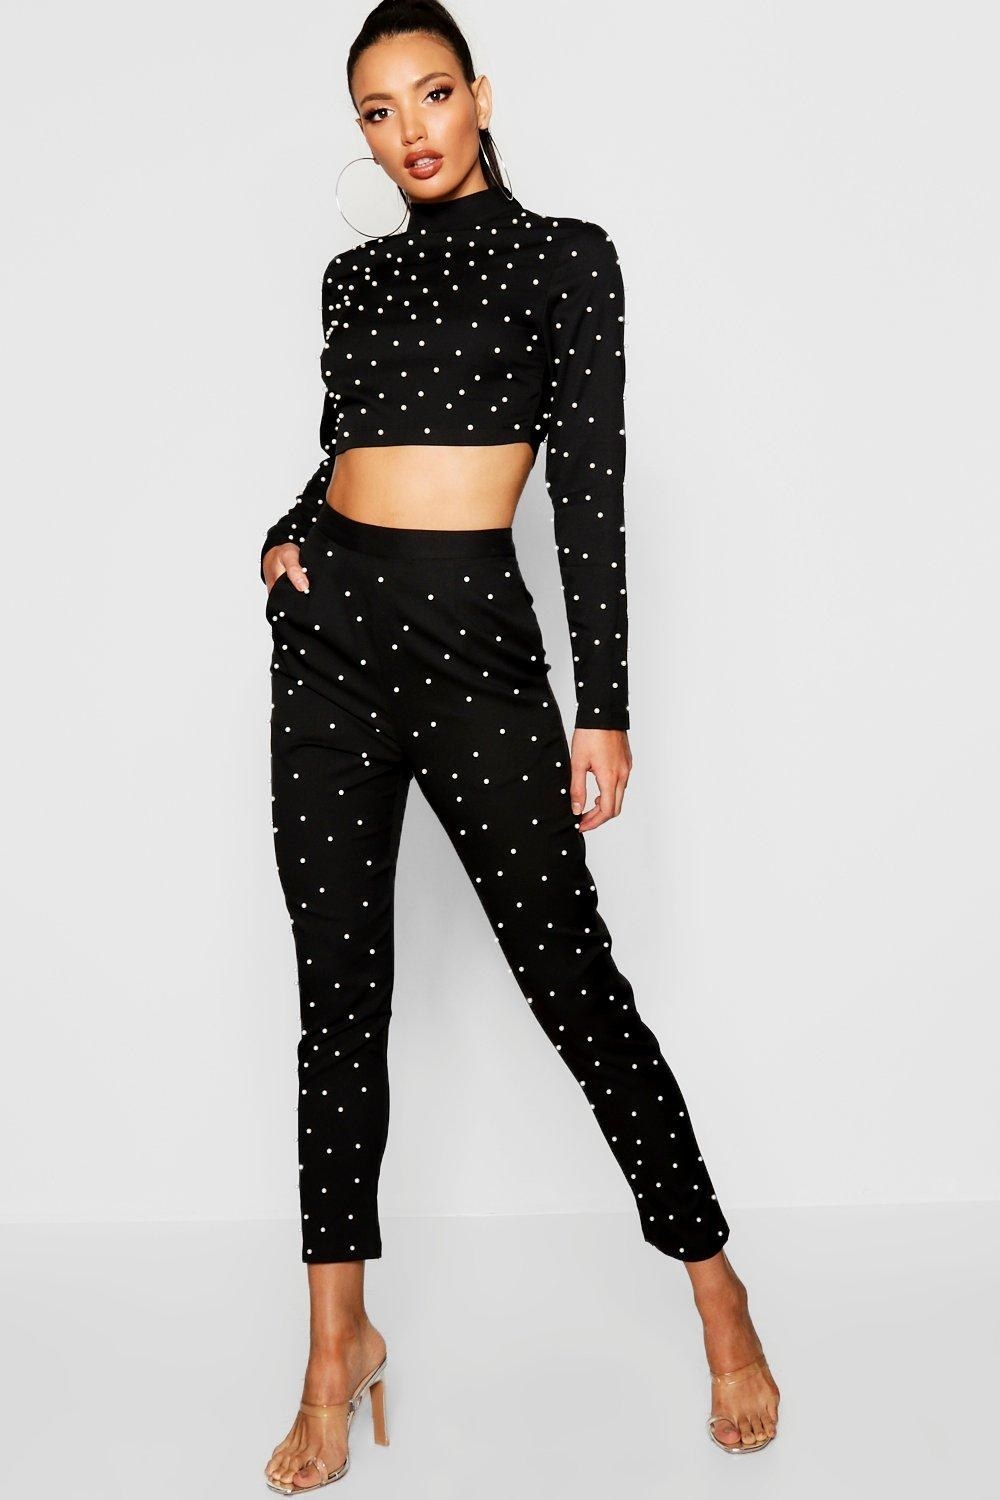 Boohoo Is Having A Massive Presidents' Day Sale And They're Pretty Much ...